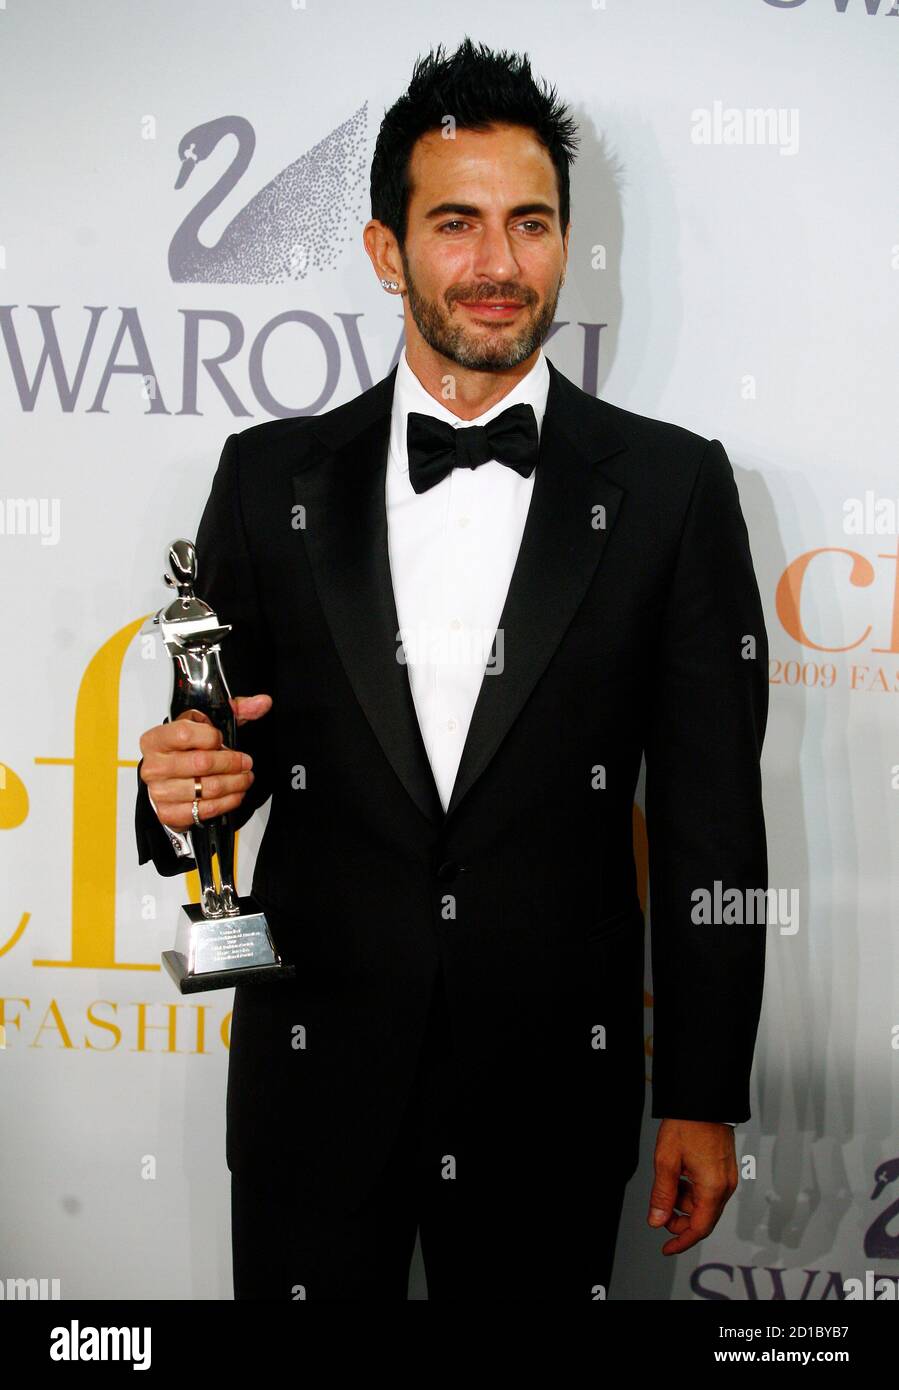 Designer Marc Jacobs poses backstage with his "International Award" trophy  during the 2009 CFDA Fashion Awards in New York June 15, 2009. REUTERS/Eric  Thayer (UNITED STATES ENTERTAINMENT FASHION Photo Stock - Alamy